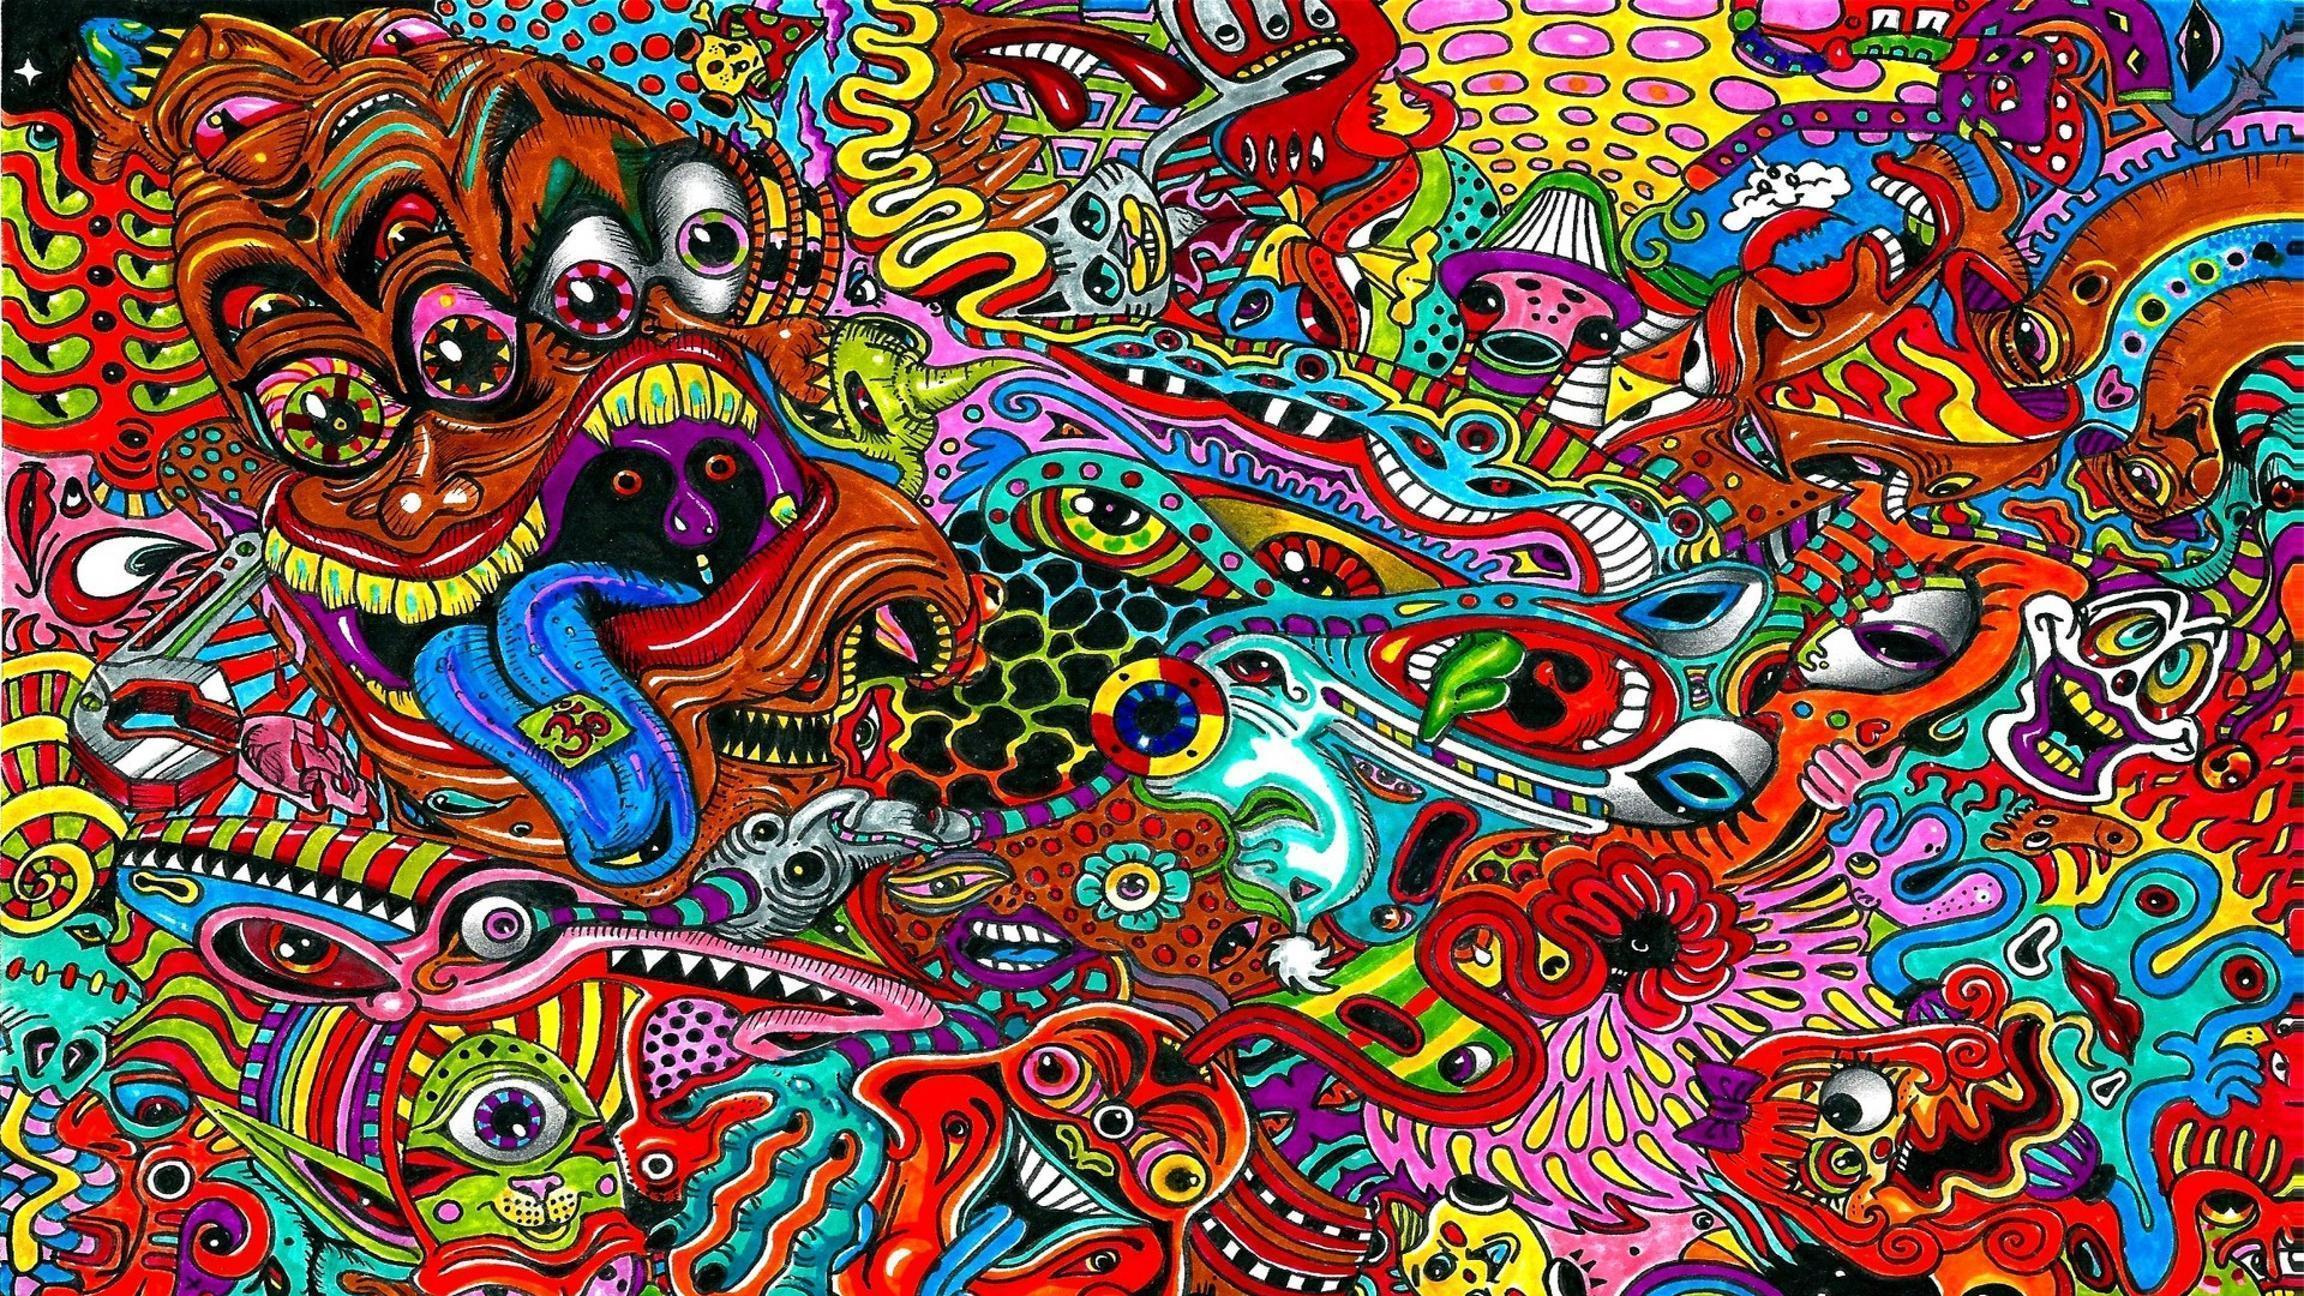 Download Wallpaper 3840x2160 drawing, surreal, colorful